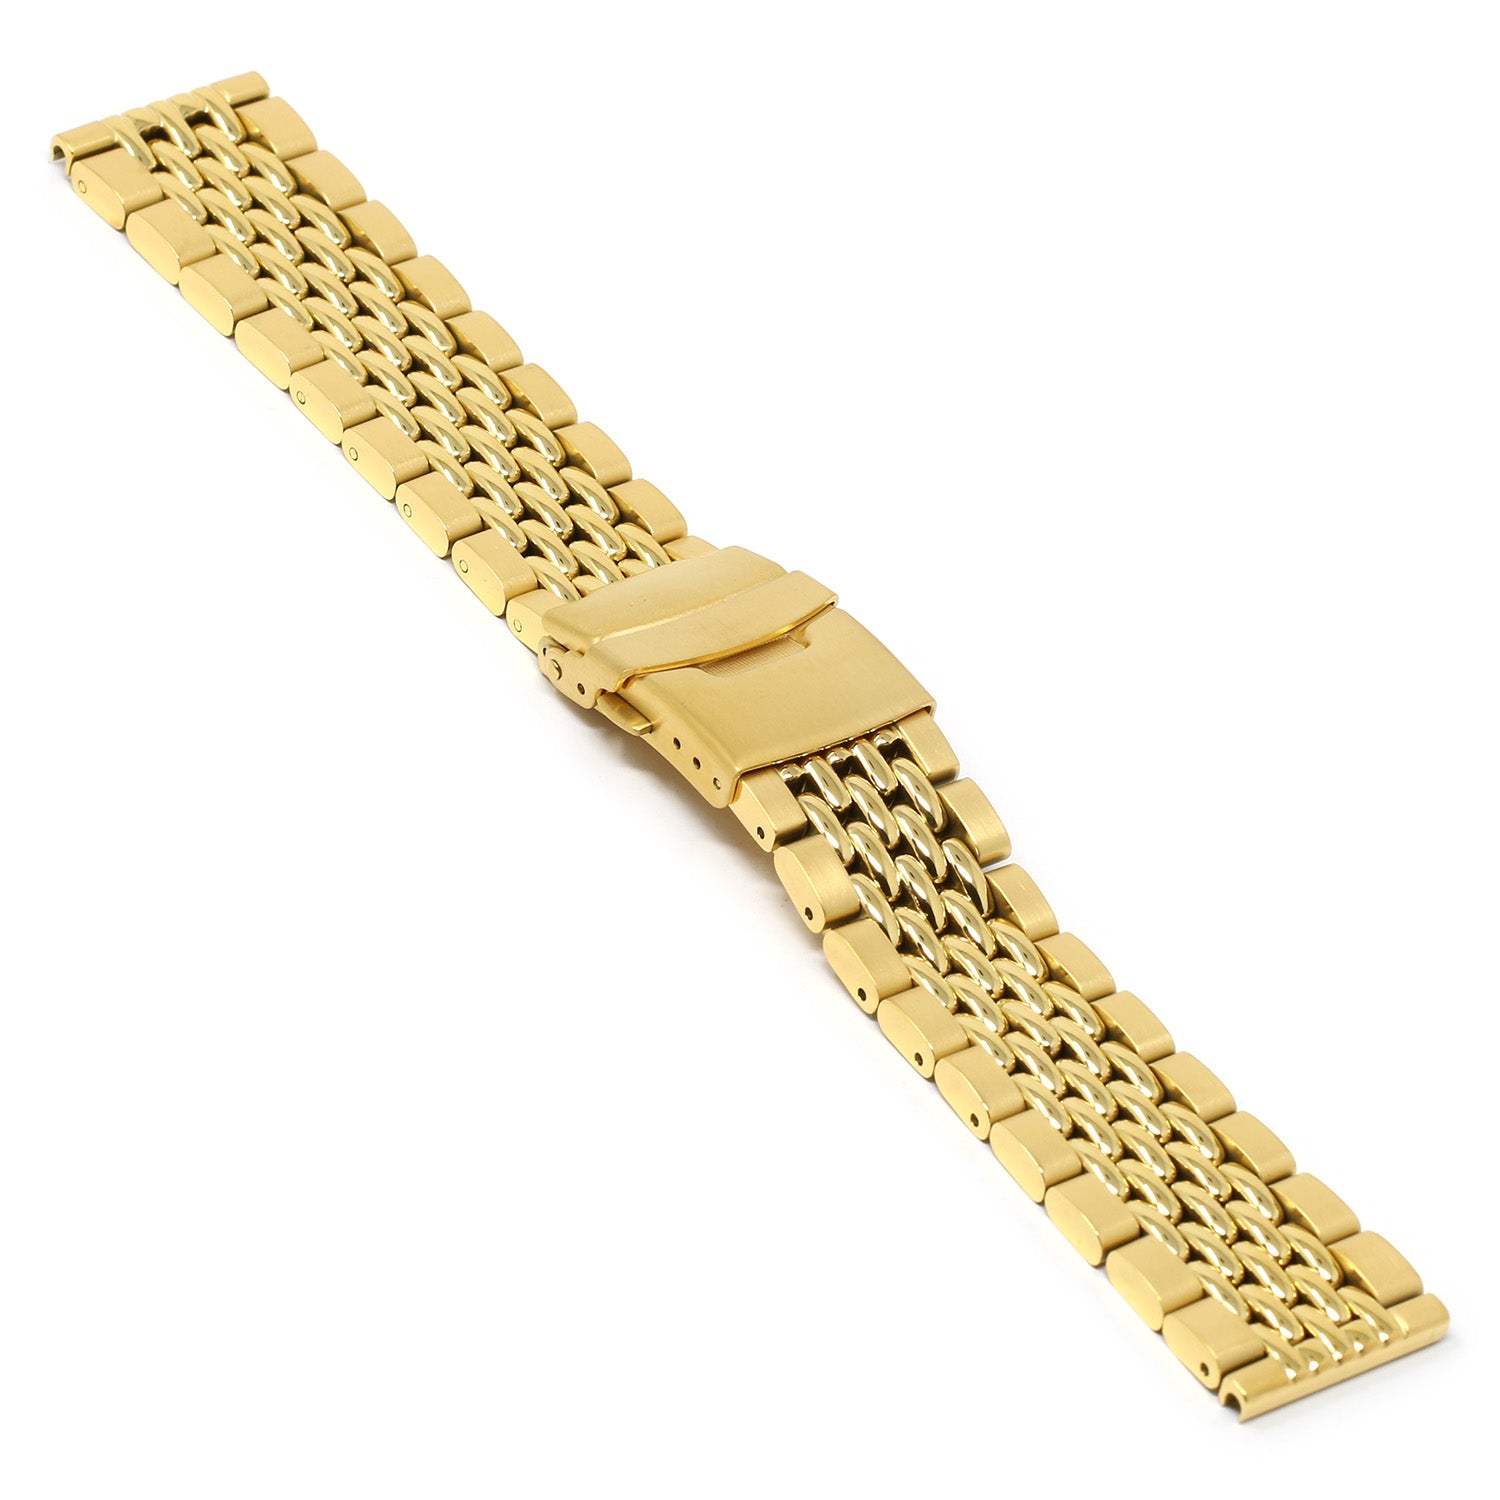 Beads of Rice Bracelet for Fitbit Sense | North Street Watch Co.